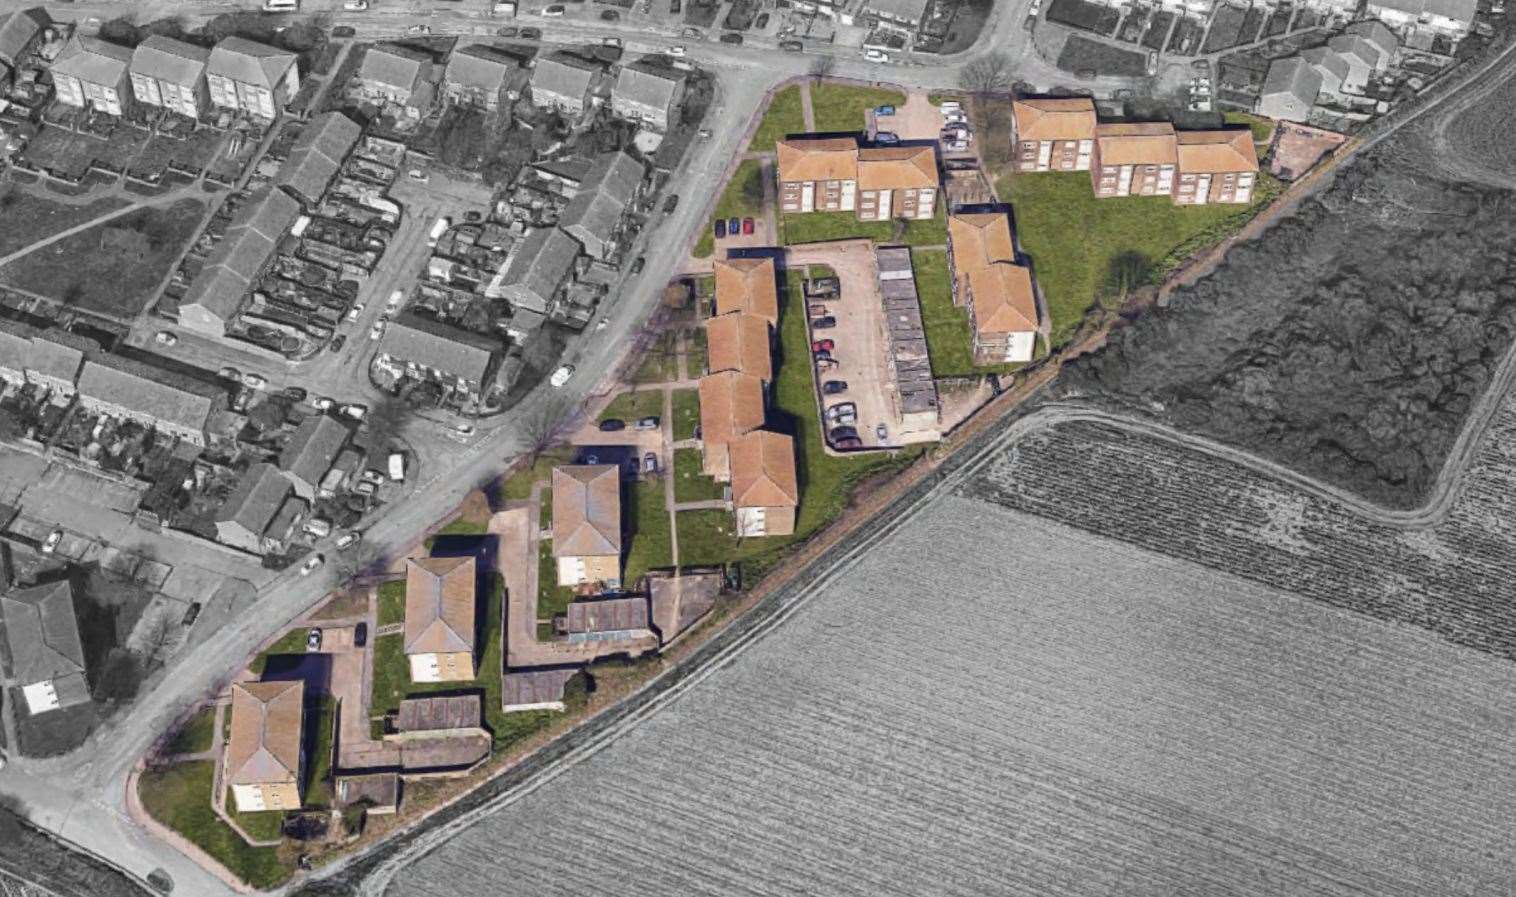 Thanet District Council plan to build 12 homes in Tomlin Drive in Margate